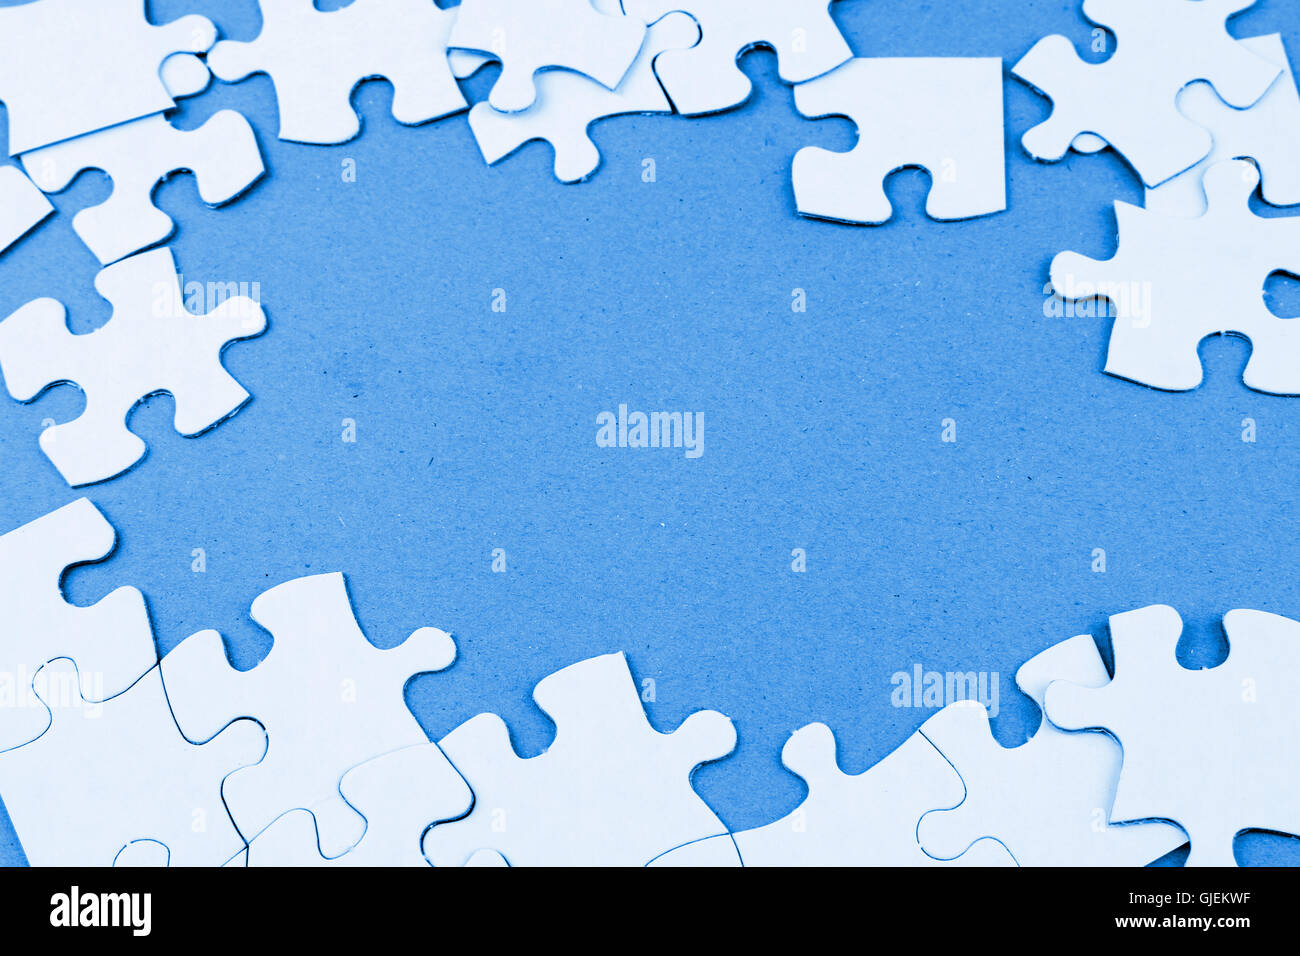 Loose jigsaw puzzle pieces on blue background Stock Photo